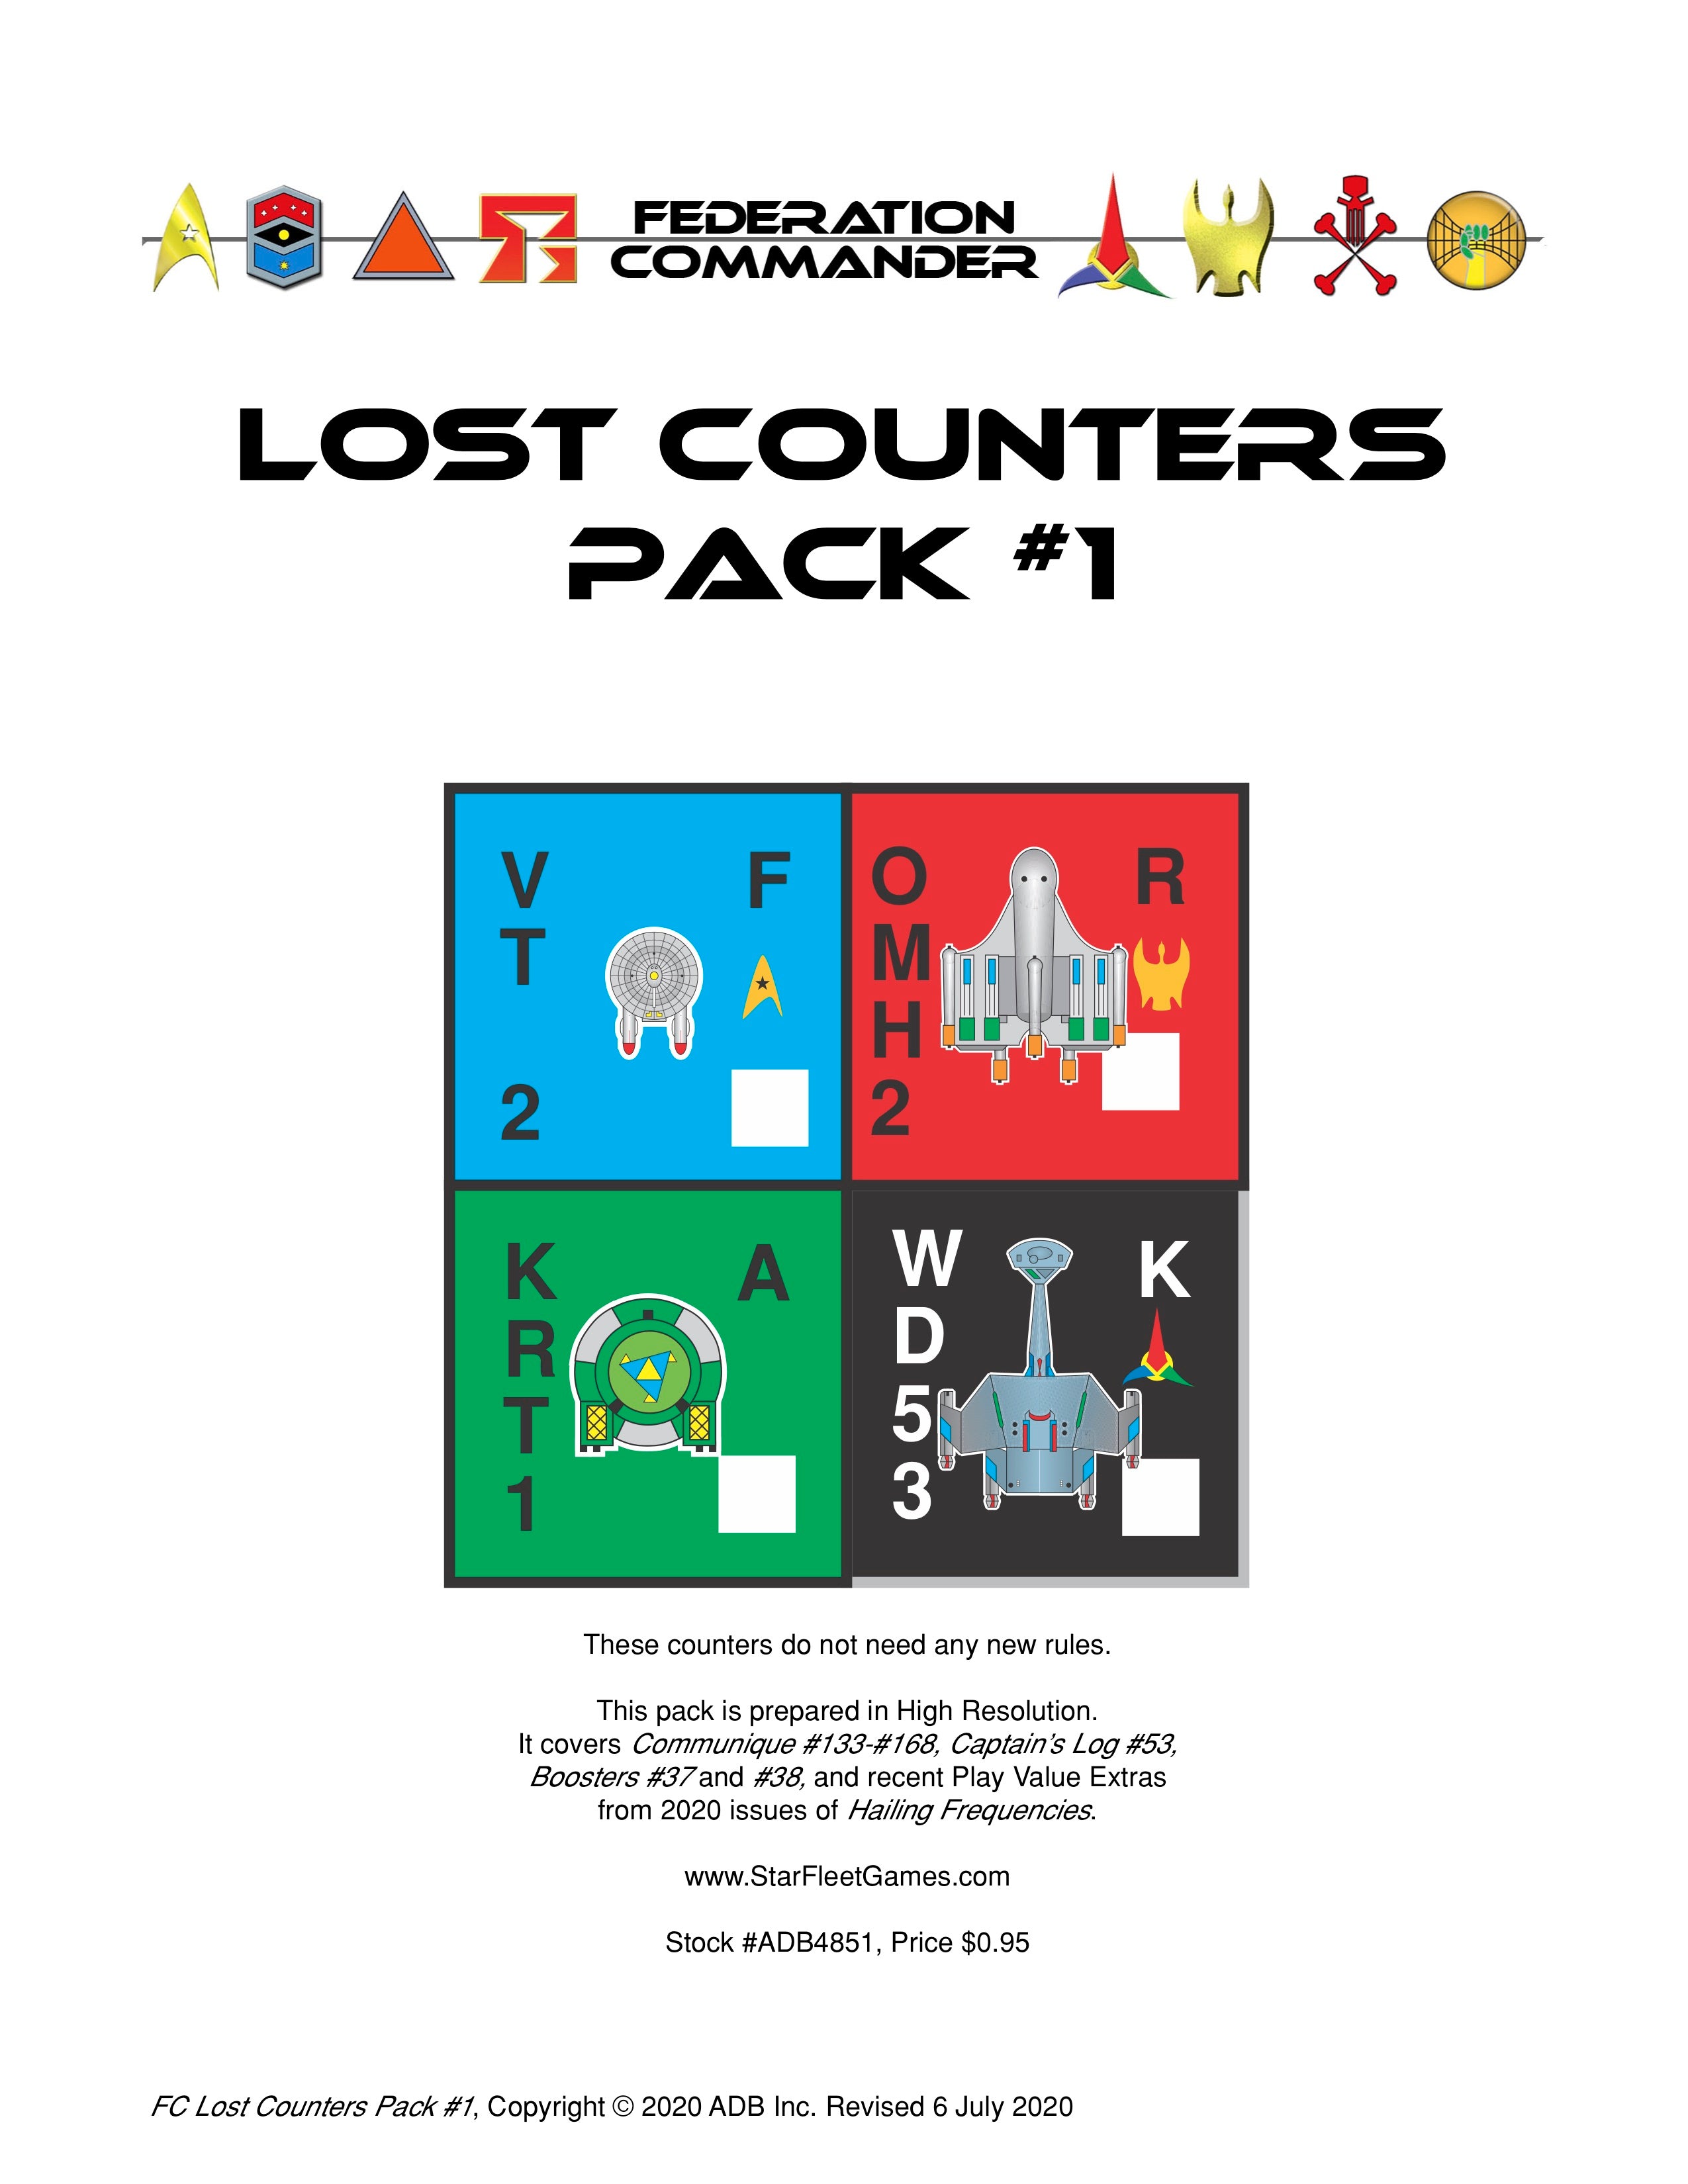 Federation Commander: Lost Counters Pack #1